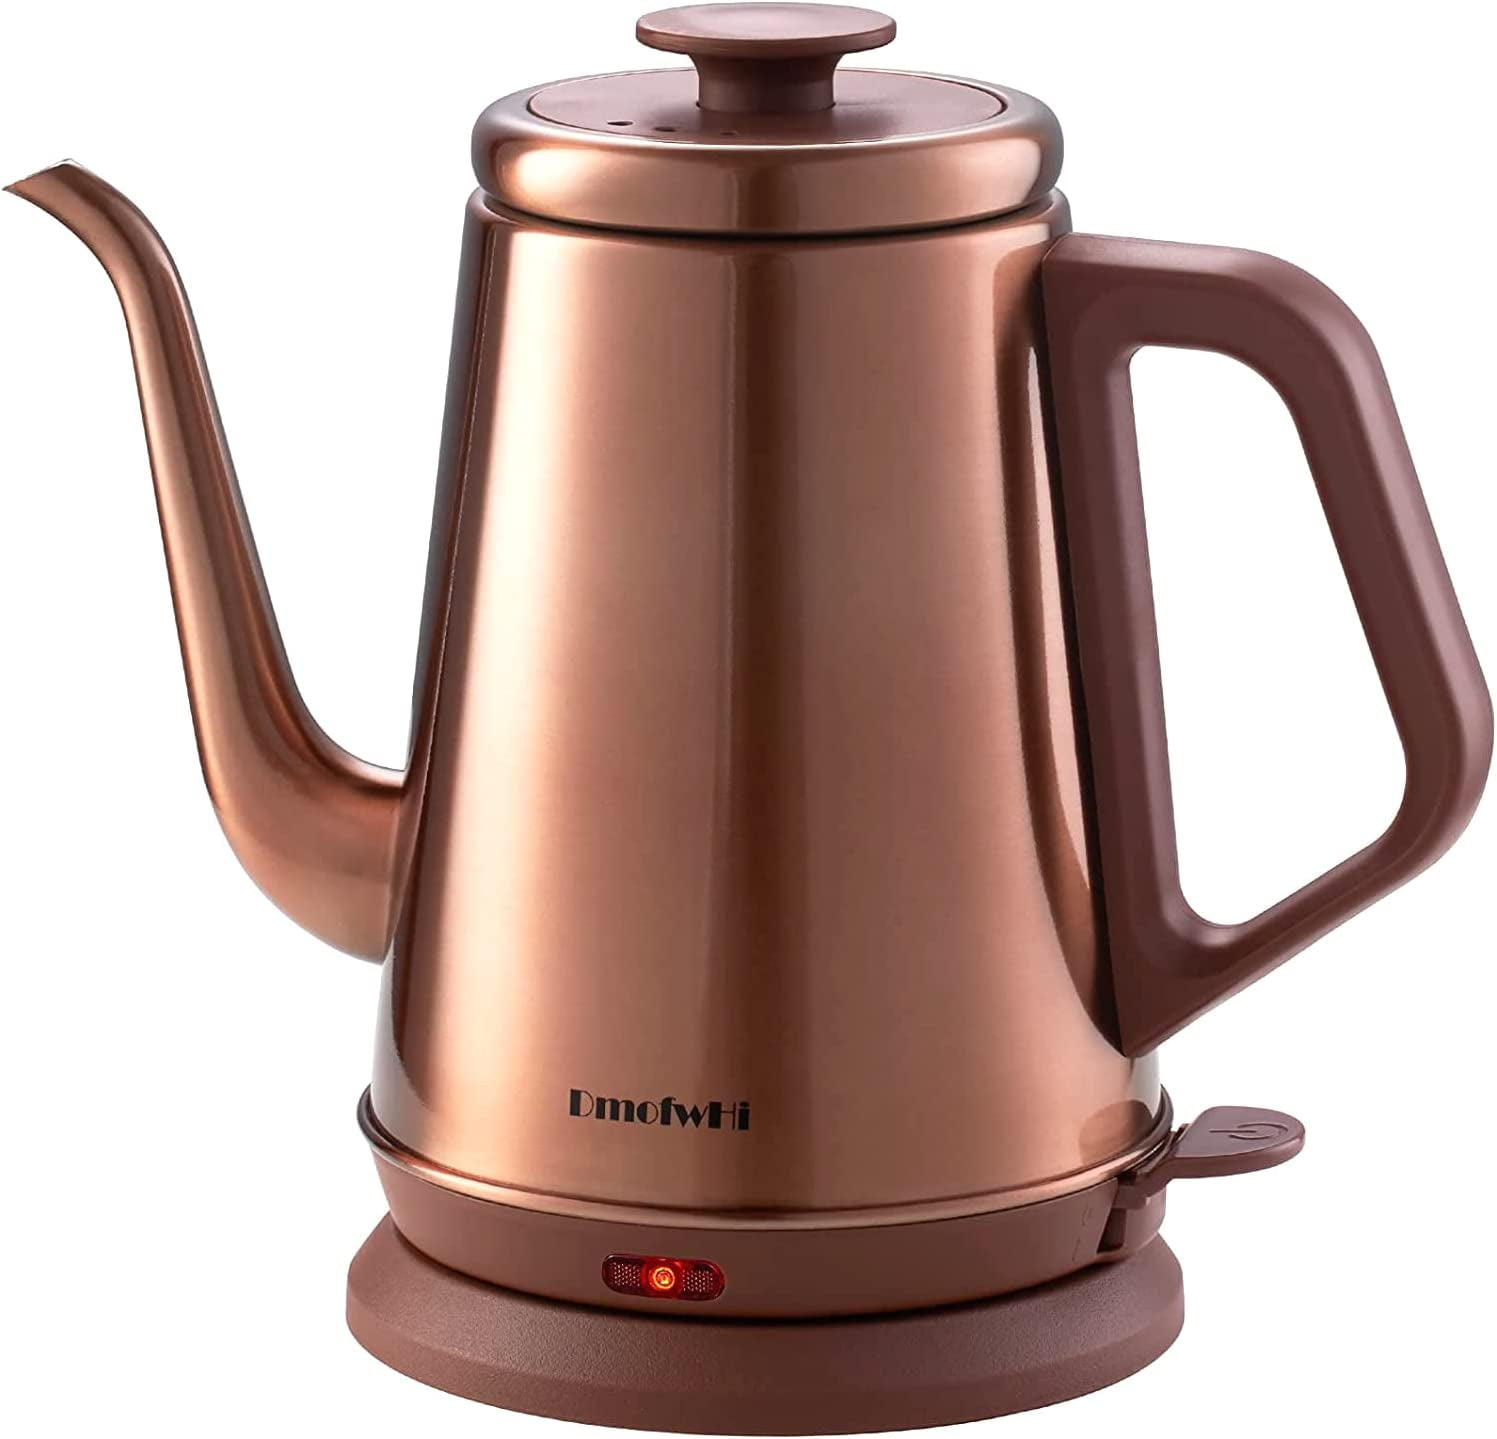 Dmofwhi Gooseneck Electric Kettle1.0L,1000W Electric Tea Kettle of 304 Stainless Steel,Auto Shut off,Water Kettle for Coffee and Tea -Matte Black